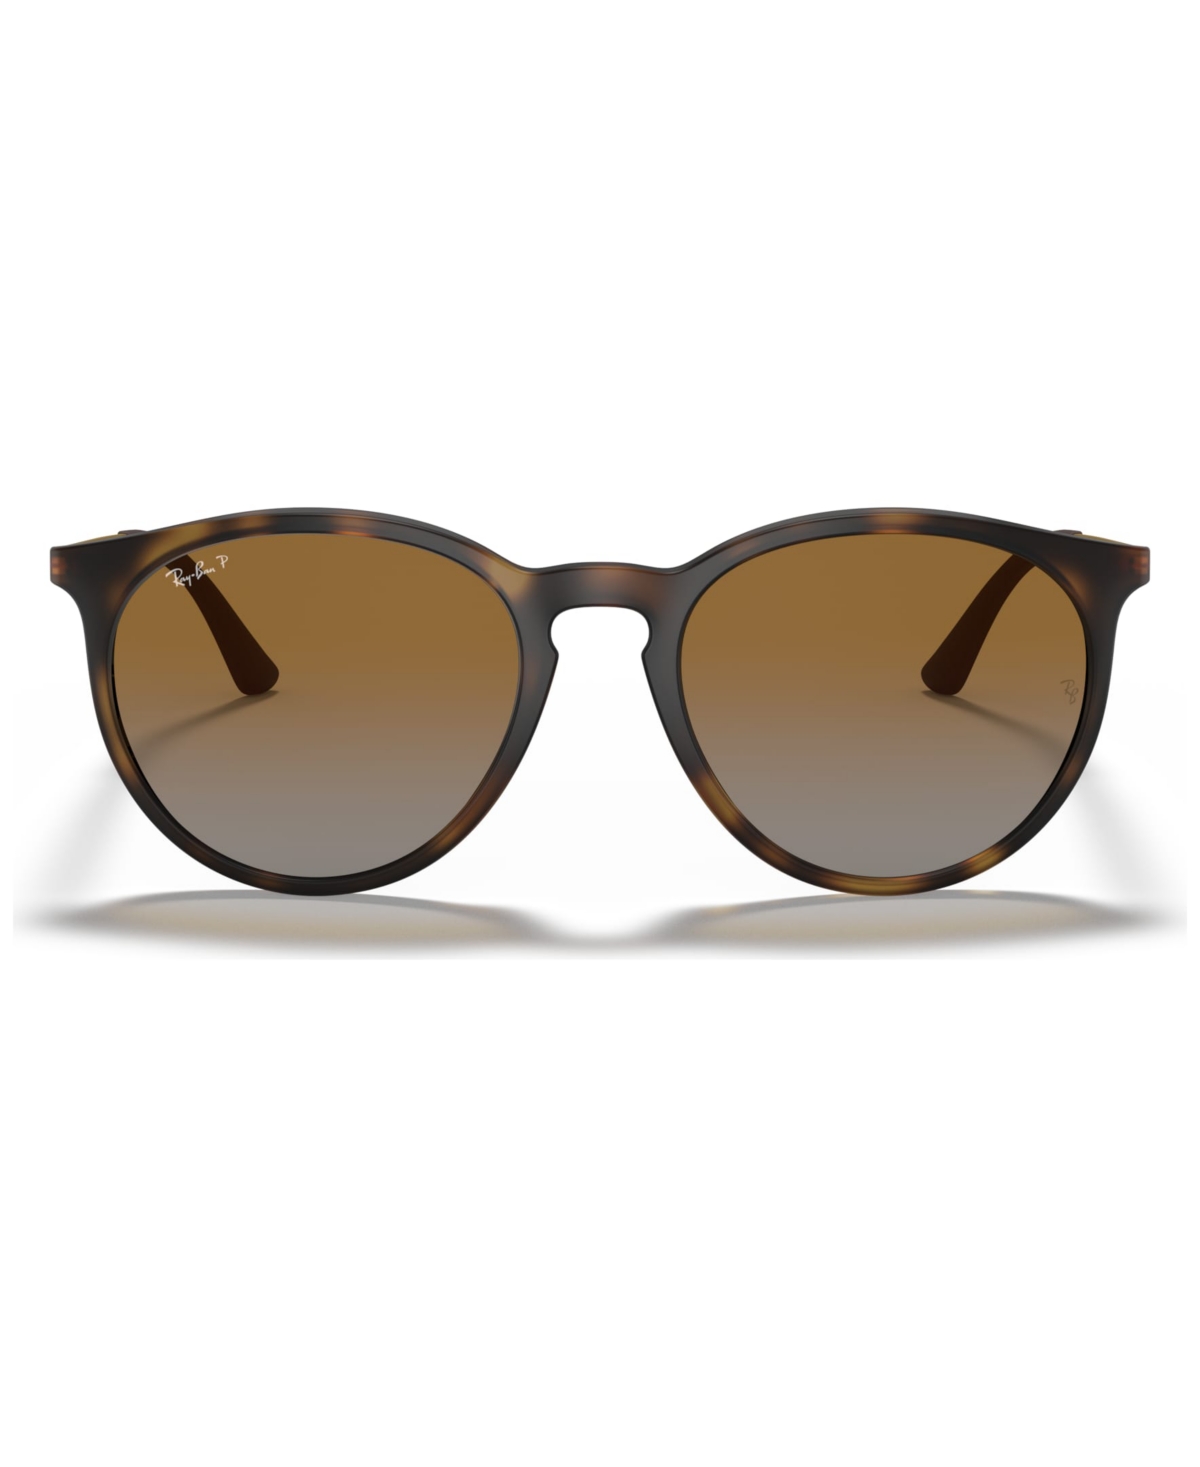 Ray Ban Polarized Sunglasses, Rb4274 In Tortoise,brown Gradient